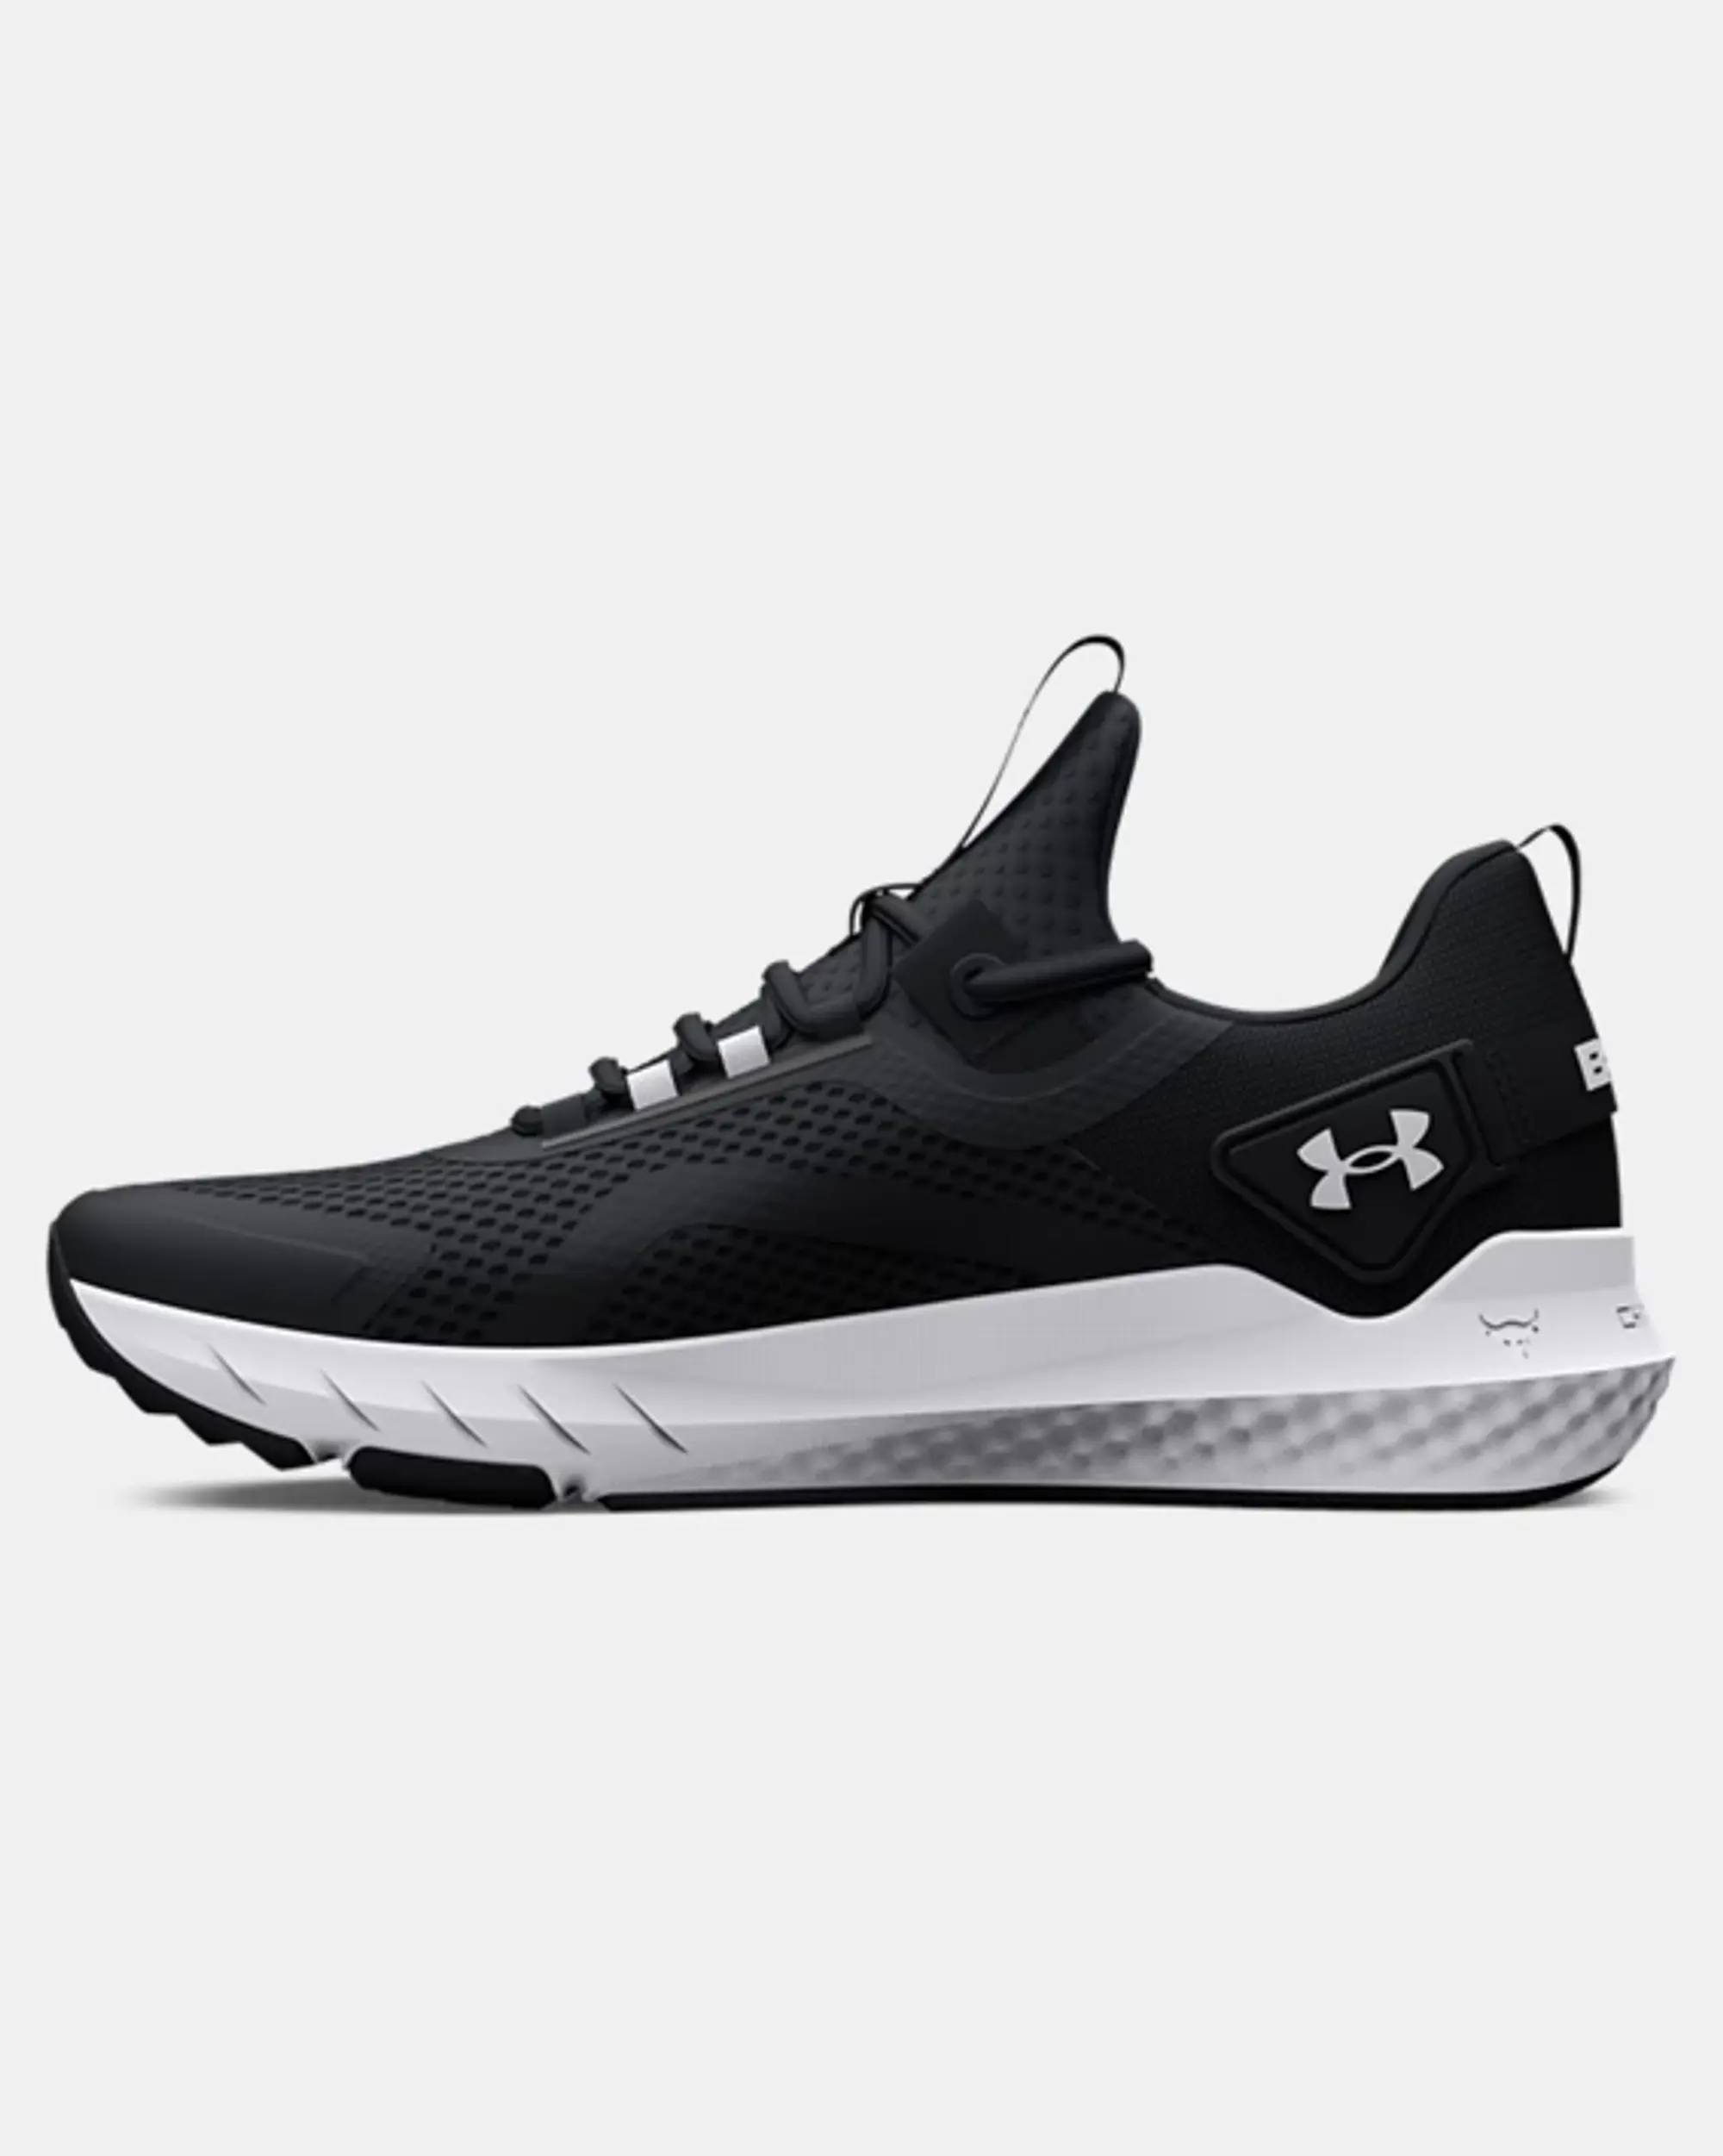 Under Armour Project Rock Bsr 3 Black